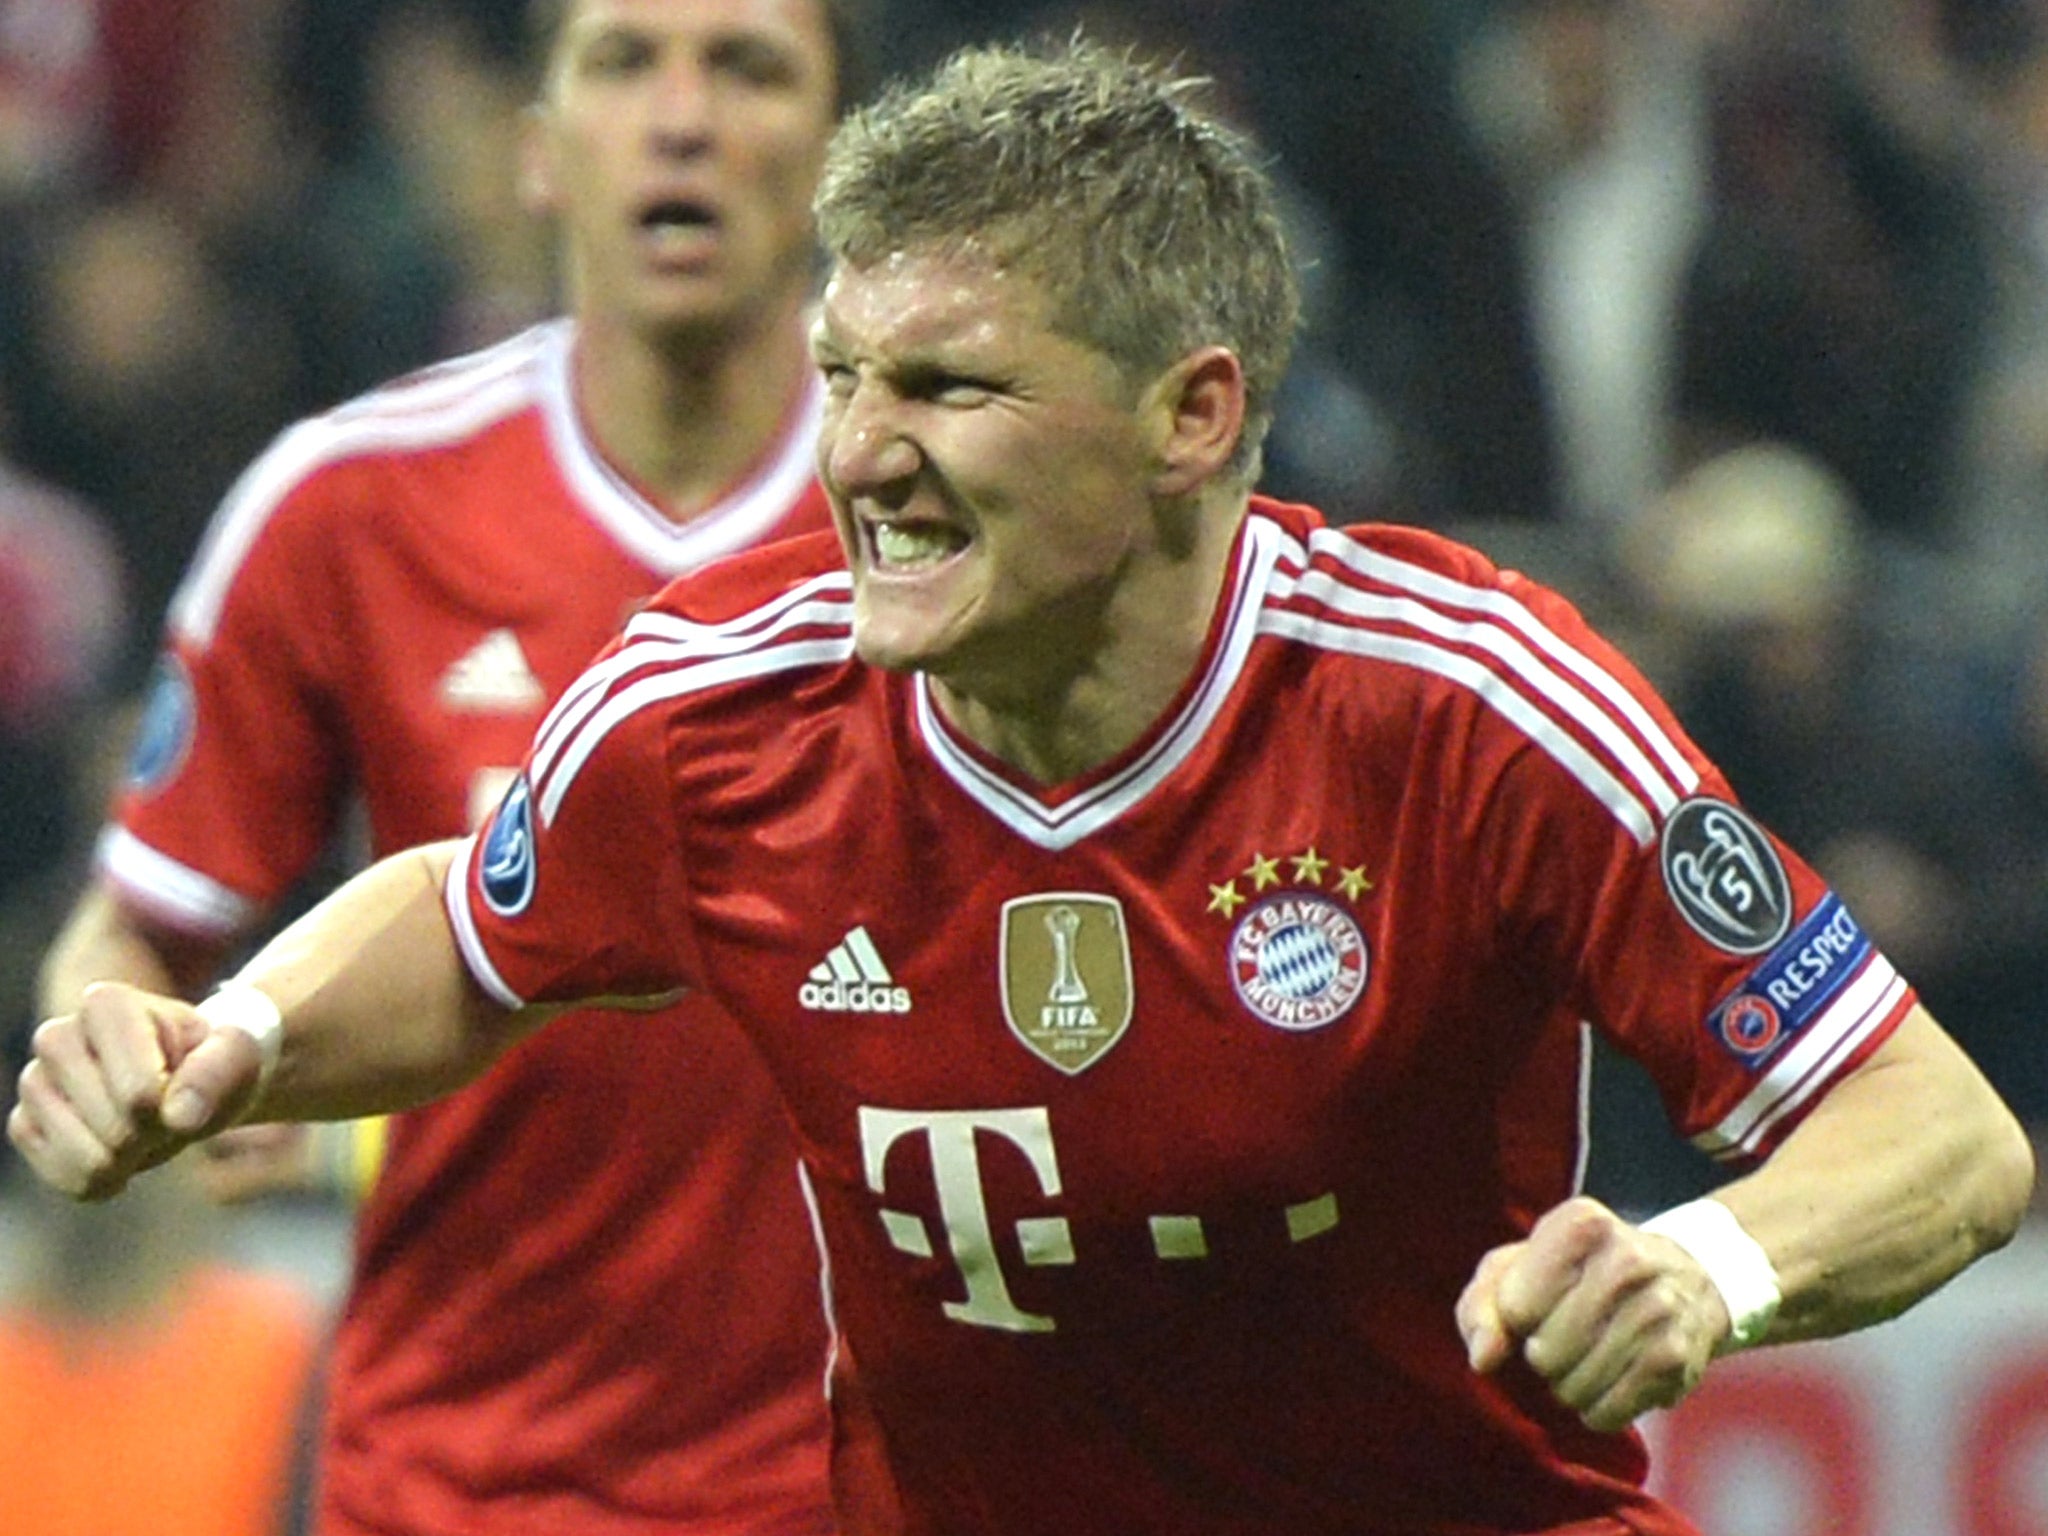 Bastian Schweinsteiger could be on his way to Old Trafford